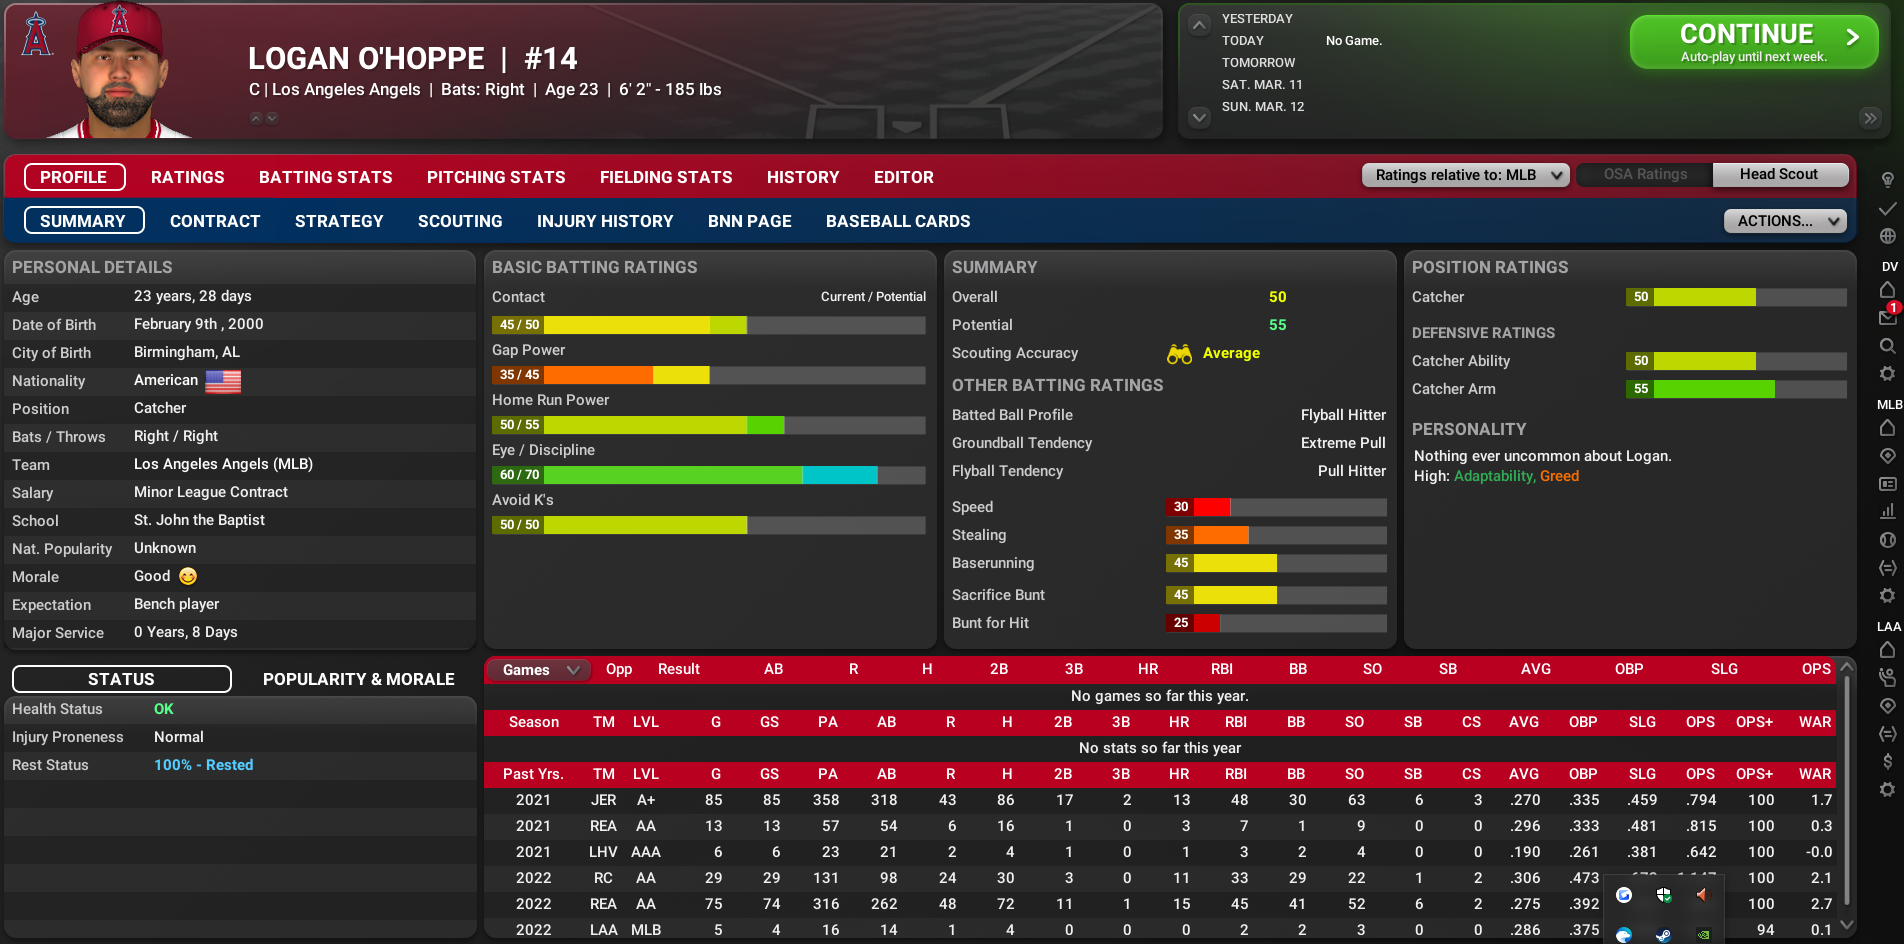 What Would Realistic Expansion in Today's MLB Look Like? – An OOTP